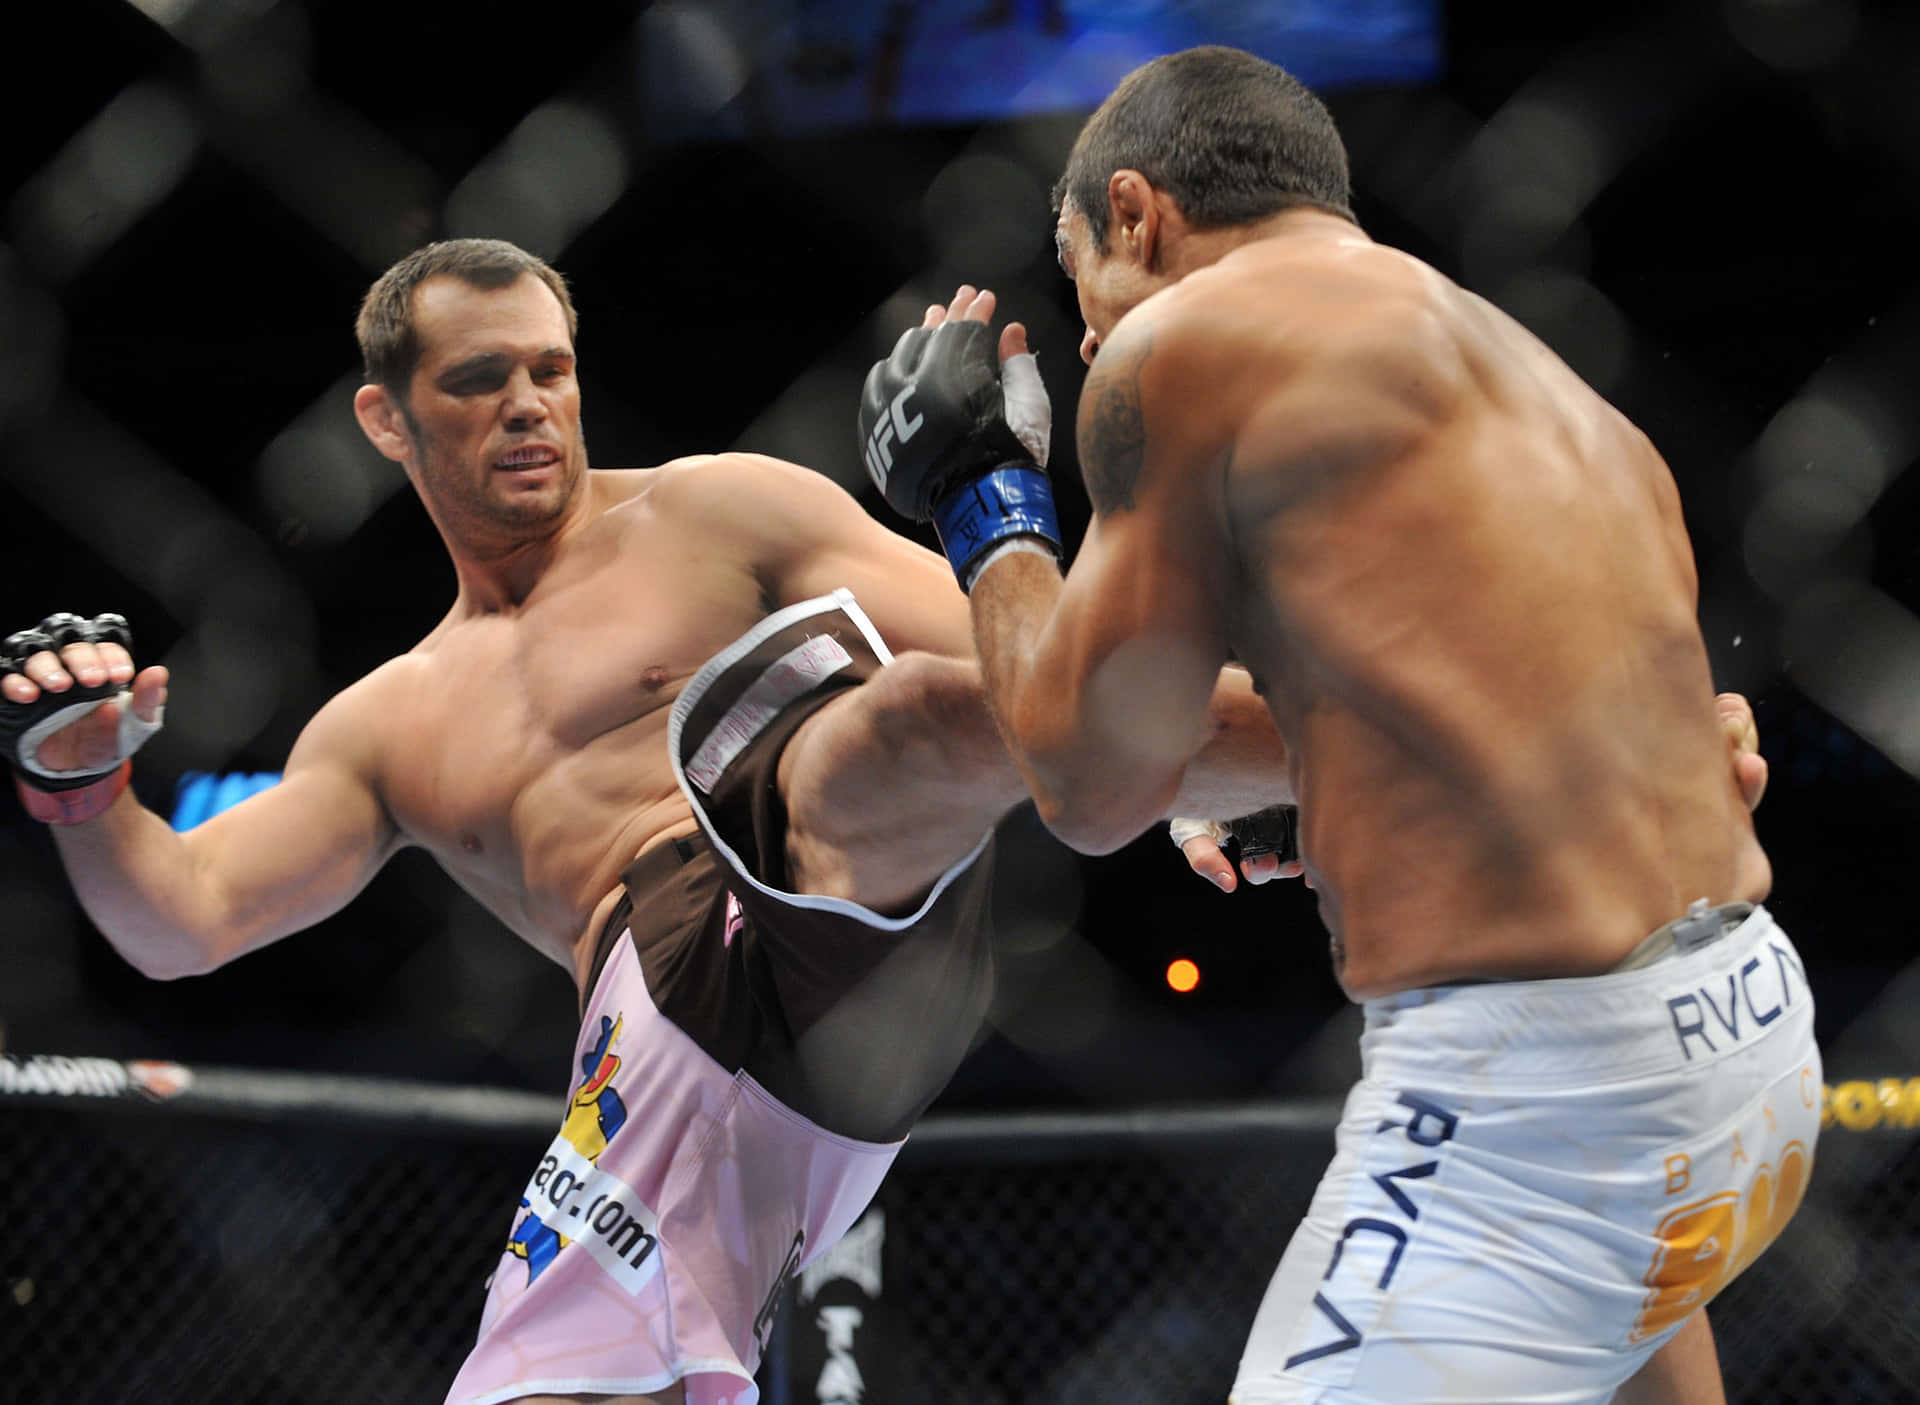 Richfranklin Sparkar Vitor Belfort - (this Would Be Appropriate For A Computer Or Mobile Wallpaper Featuring The Two Fighters) Wallpaper